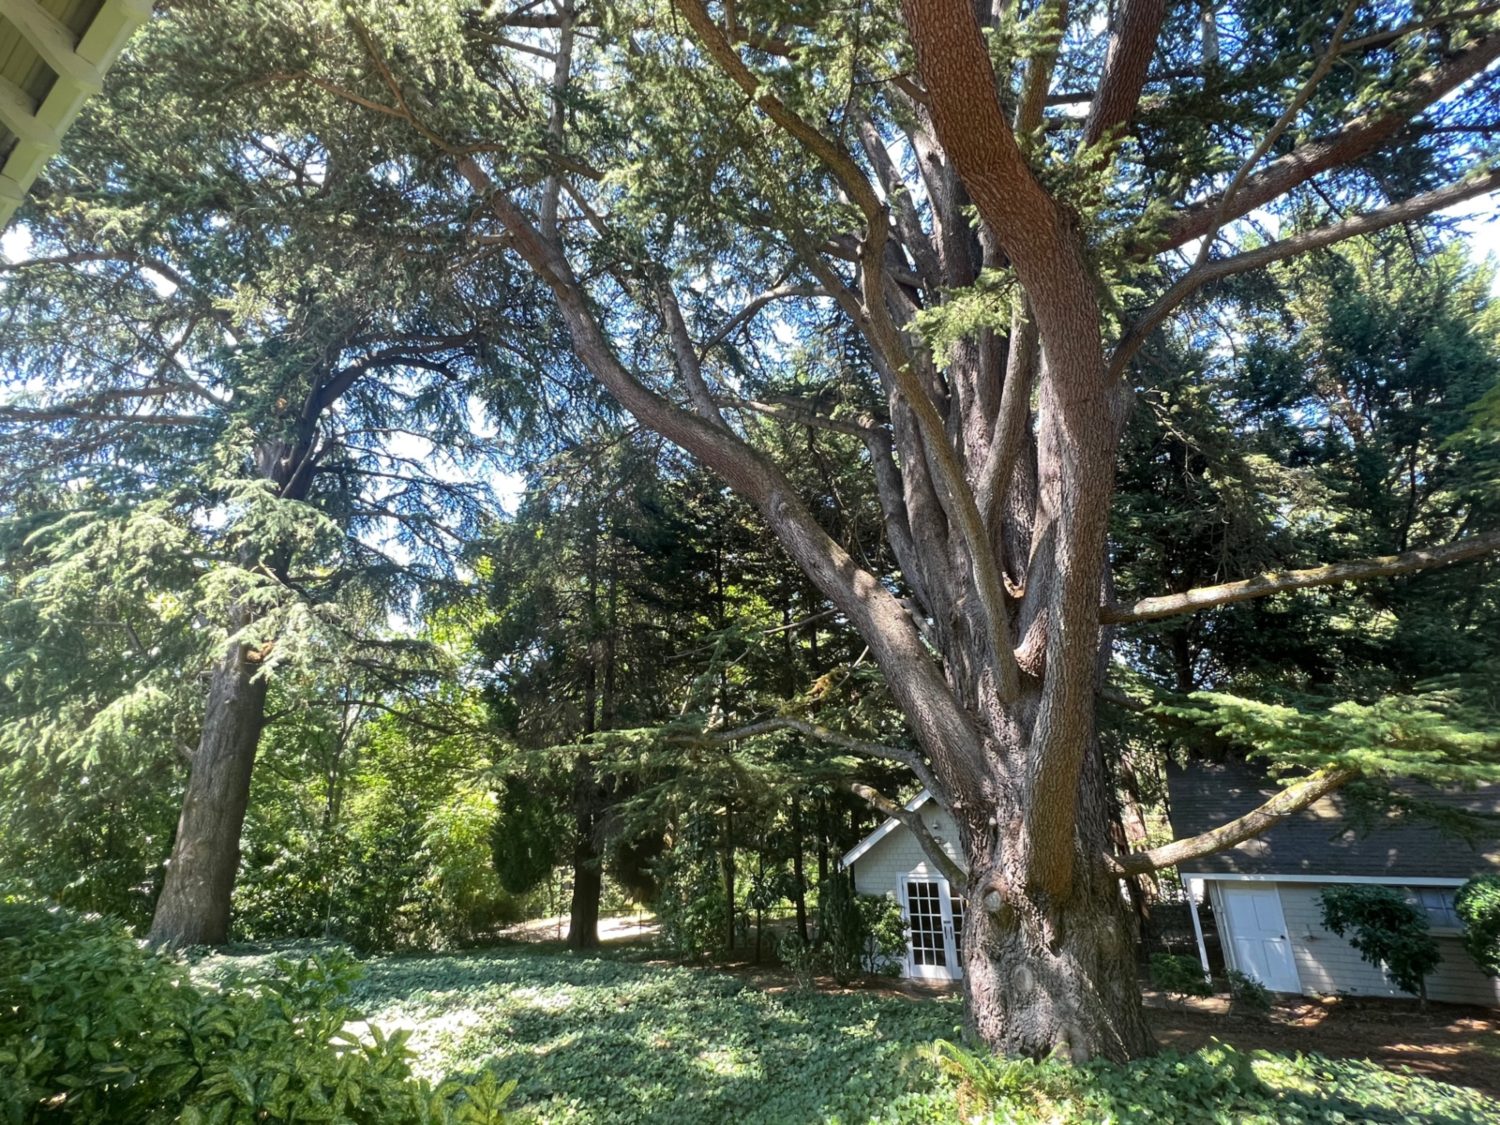 How developers helped shape Seattle’s controversial tree protection ordinance